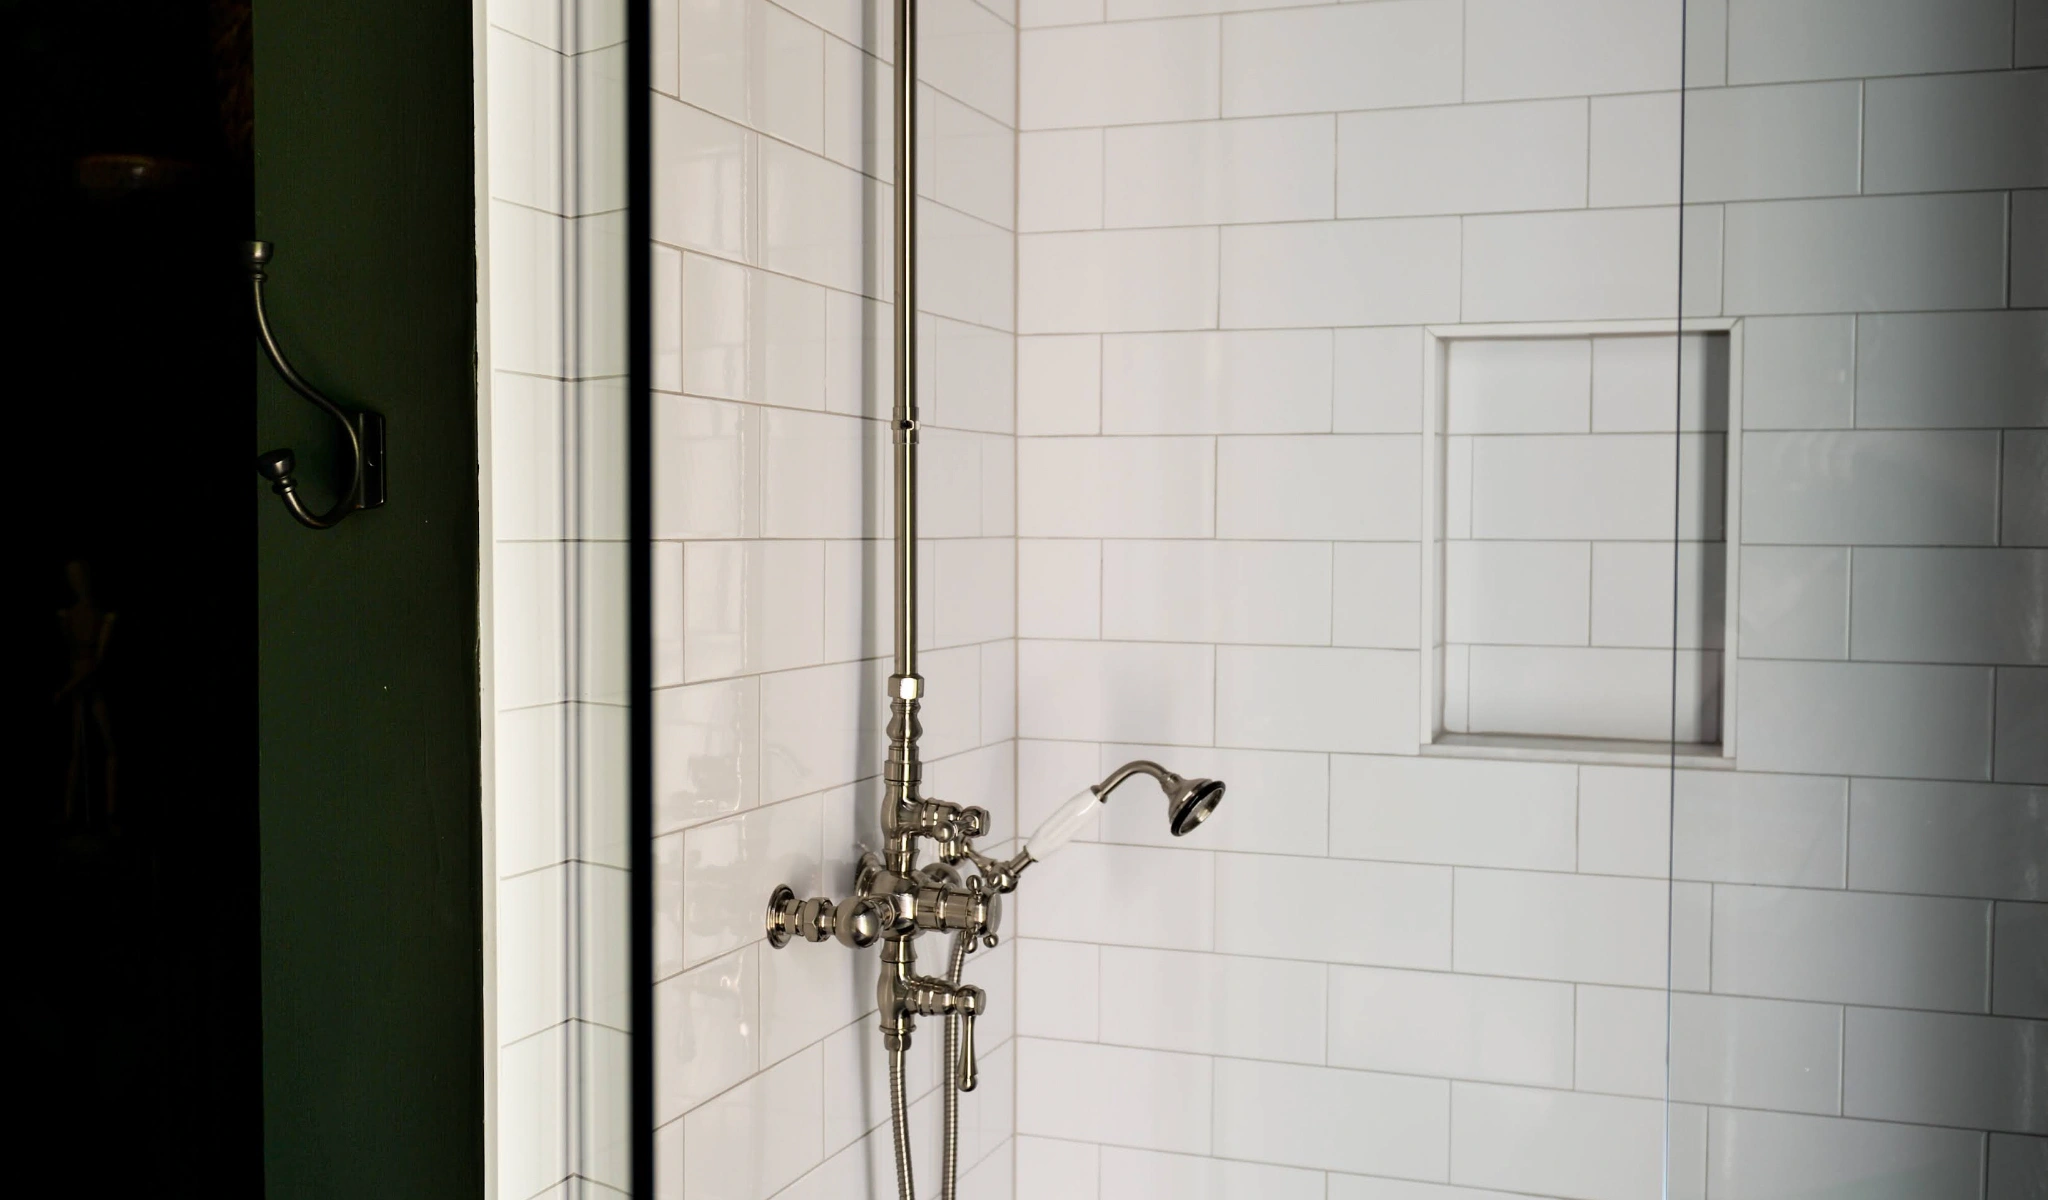 A white tiled shower with glass doors.